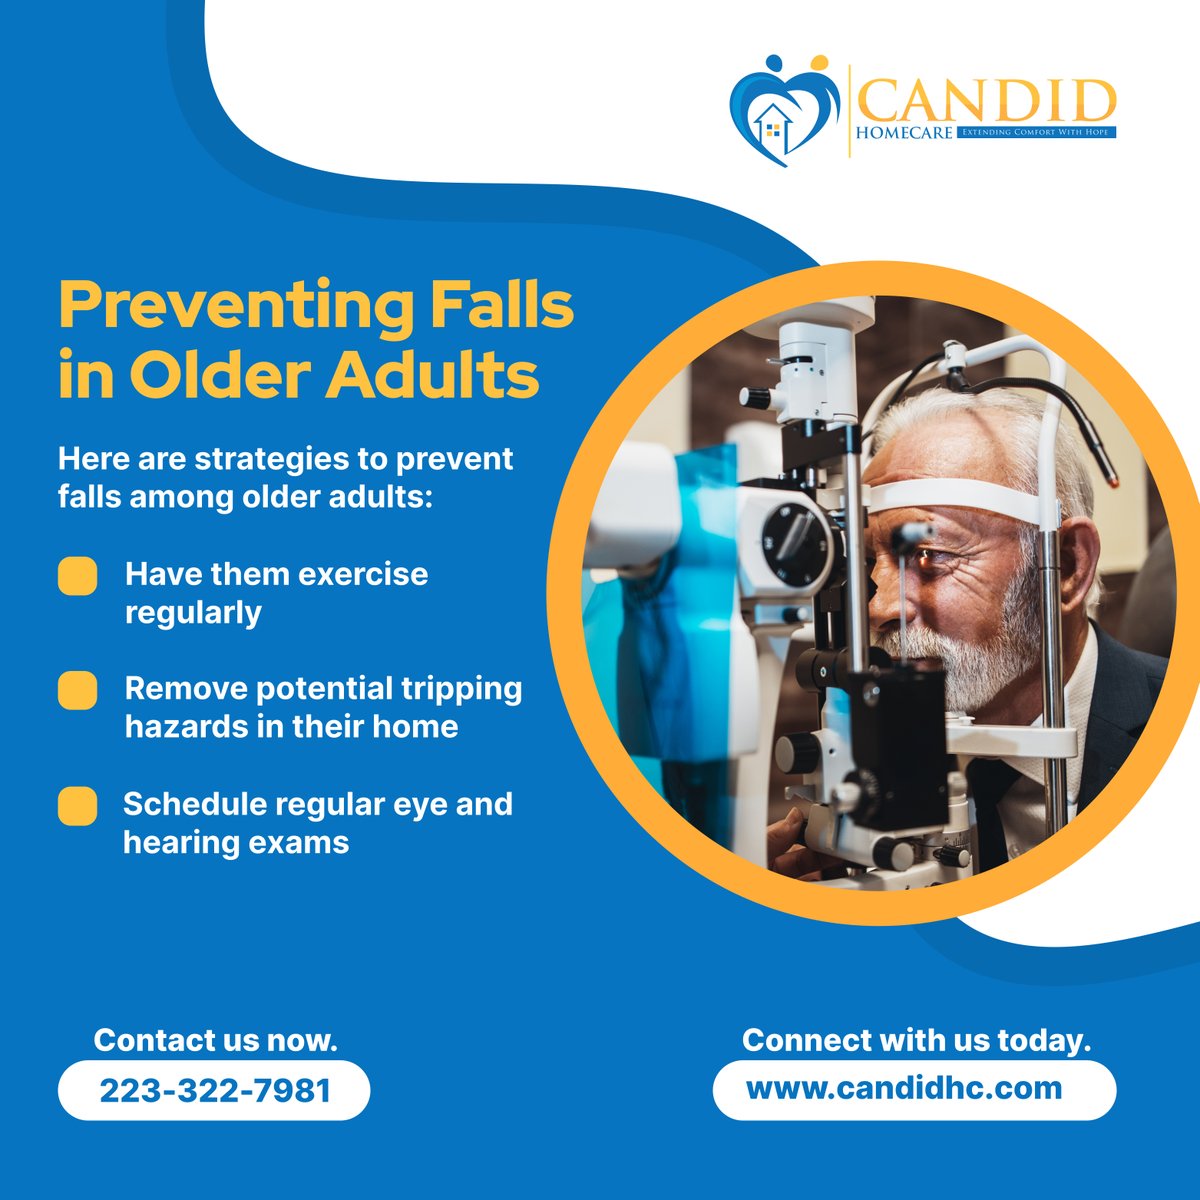 Falls are the leading cause of injury among the aging population. However, by taking proactive steps, older adults can reduce their risk of falls and stay healthy and independent.

#HenricoVirginia #FallPrevention #Homecare